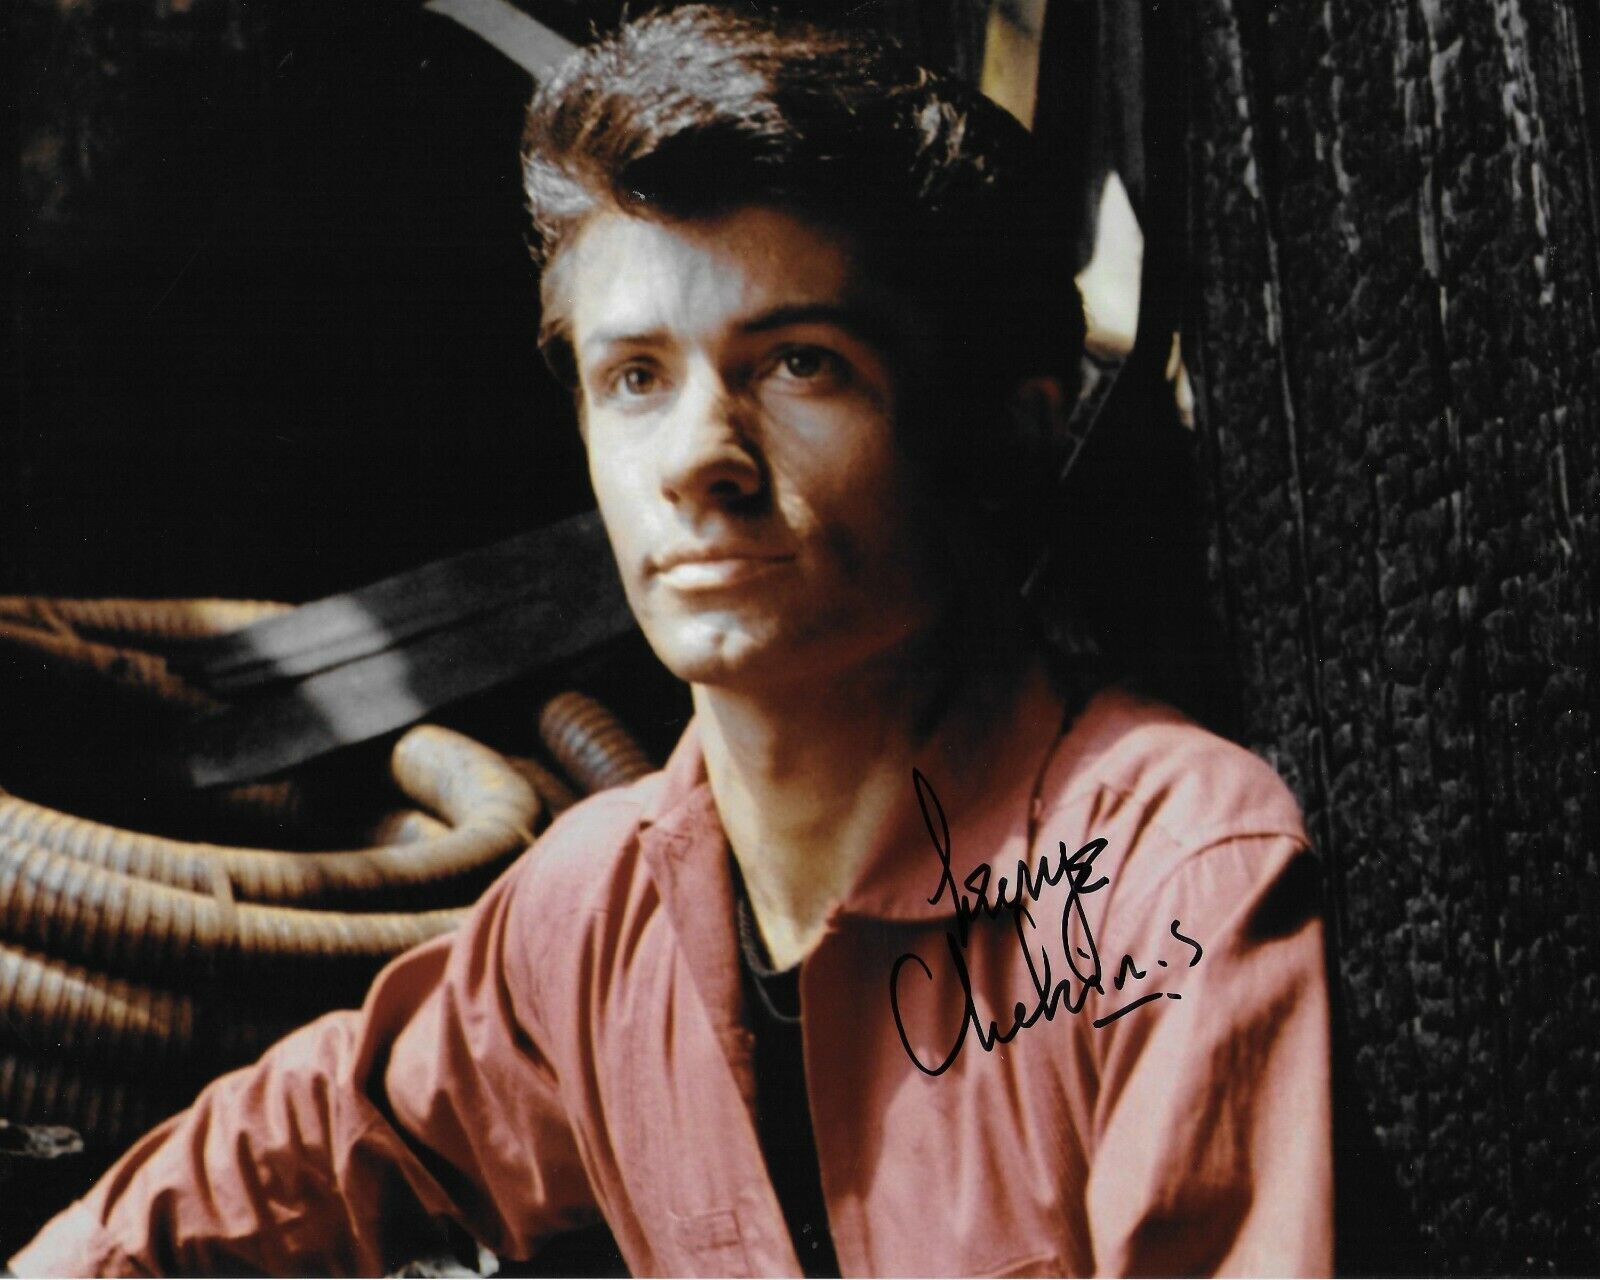 George Chakiris Original In Person Autographed 8X10 Photo Poster painting #15 - West Side Story